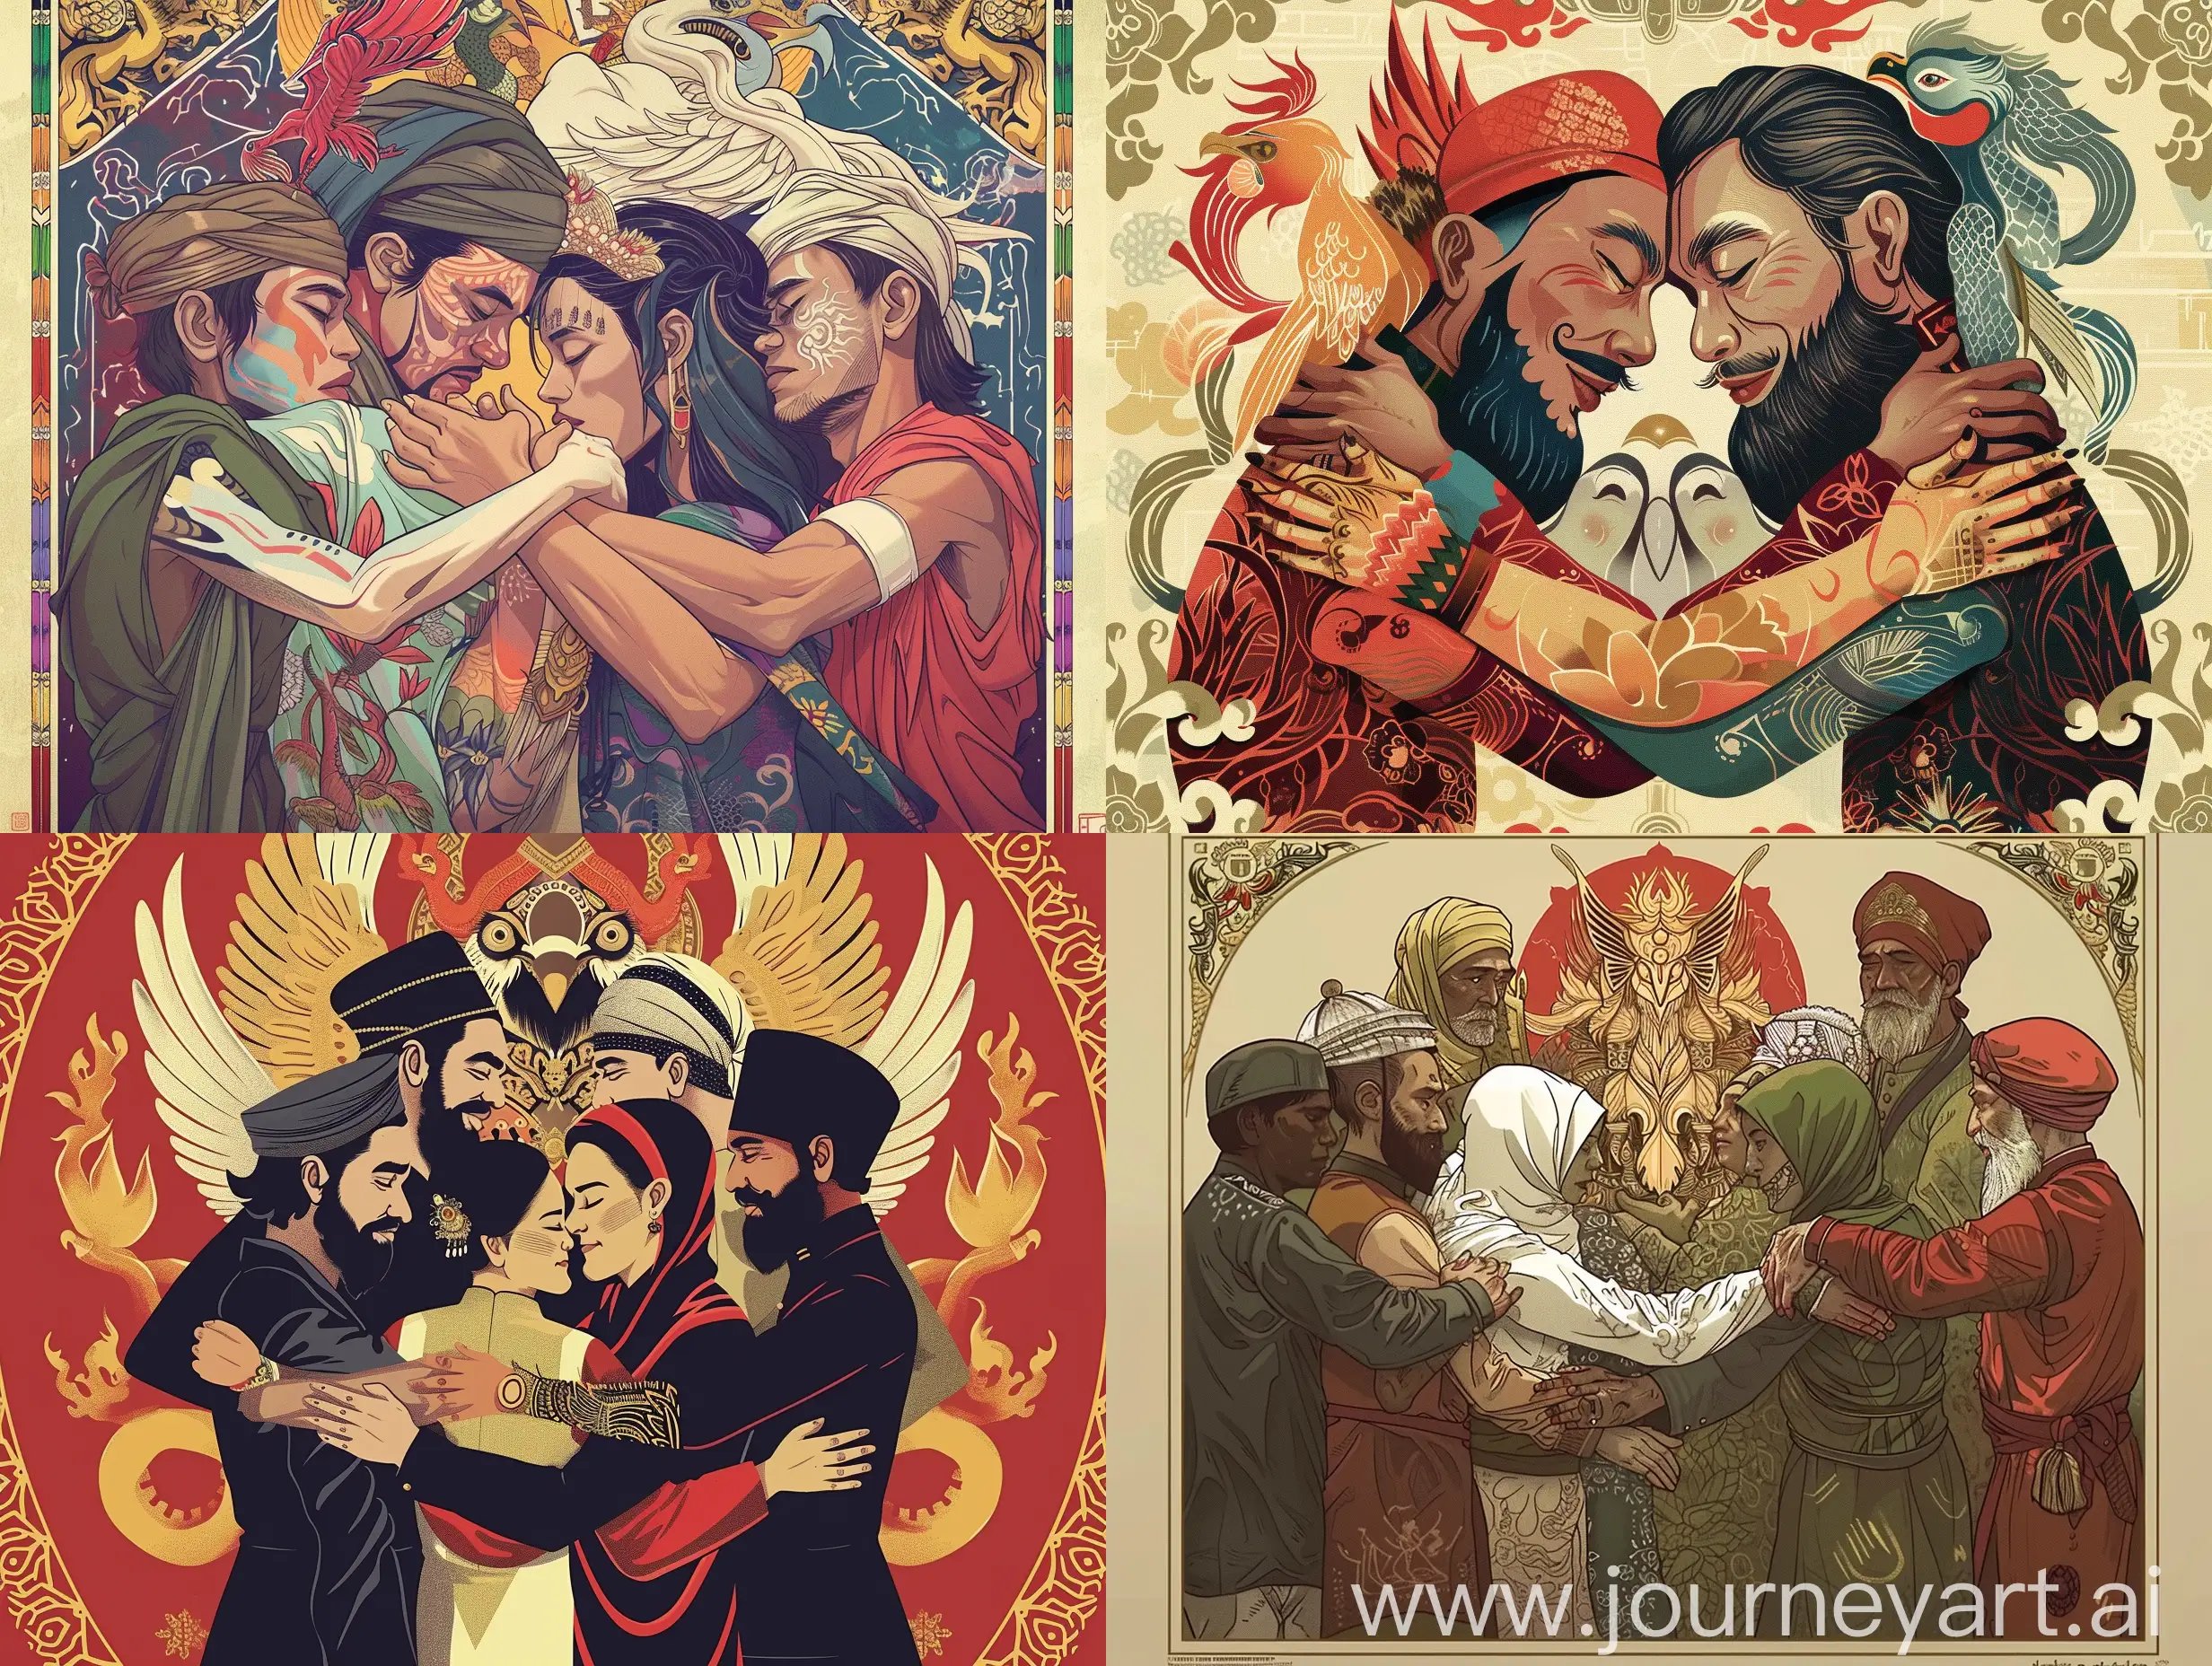 make me a poster containing different races and religions embracing each other and then there is the symbol of the Indonesian state, the Garuda